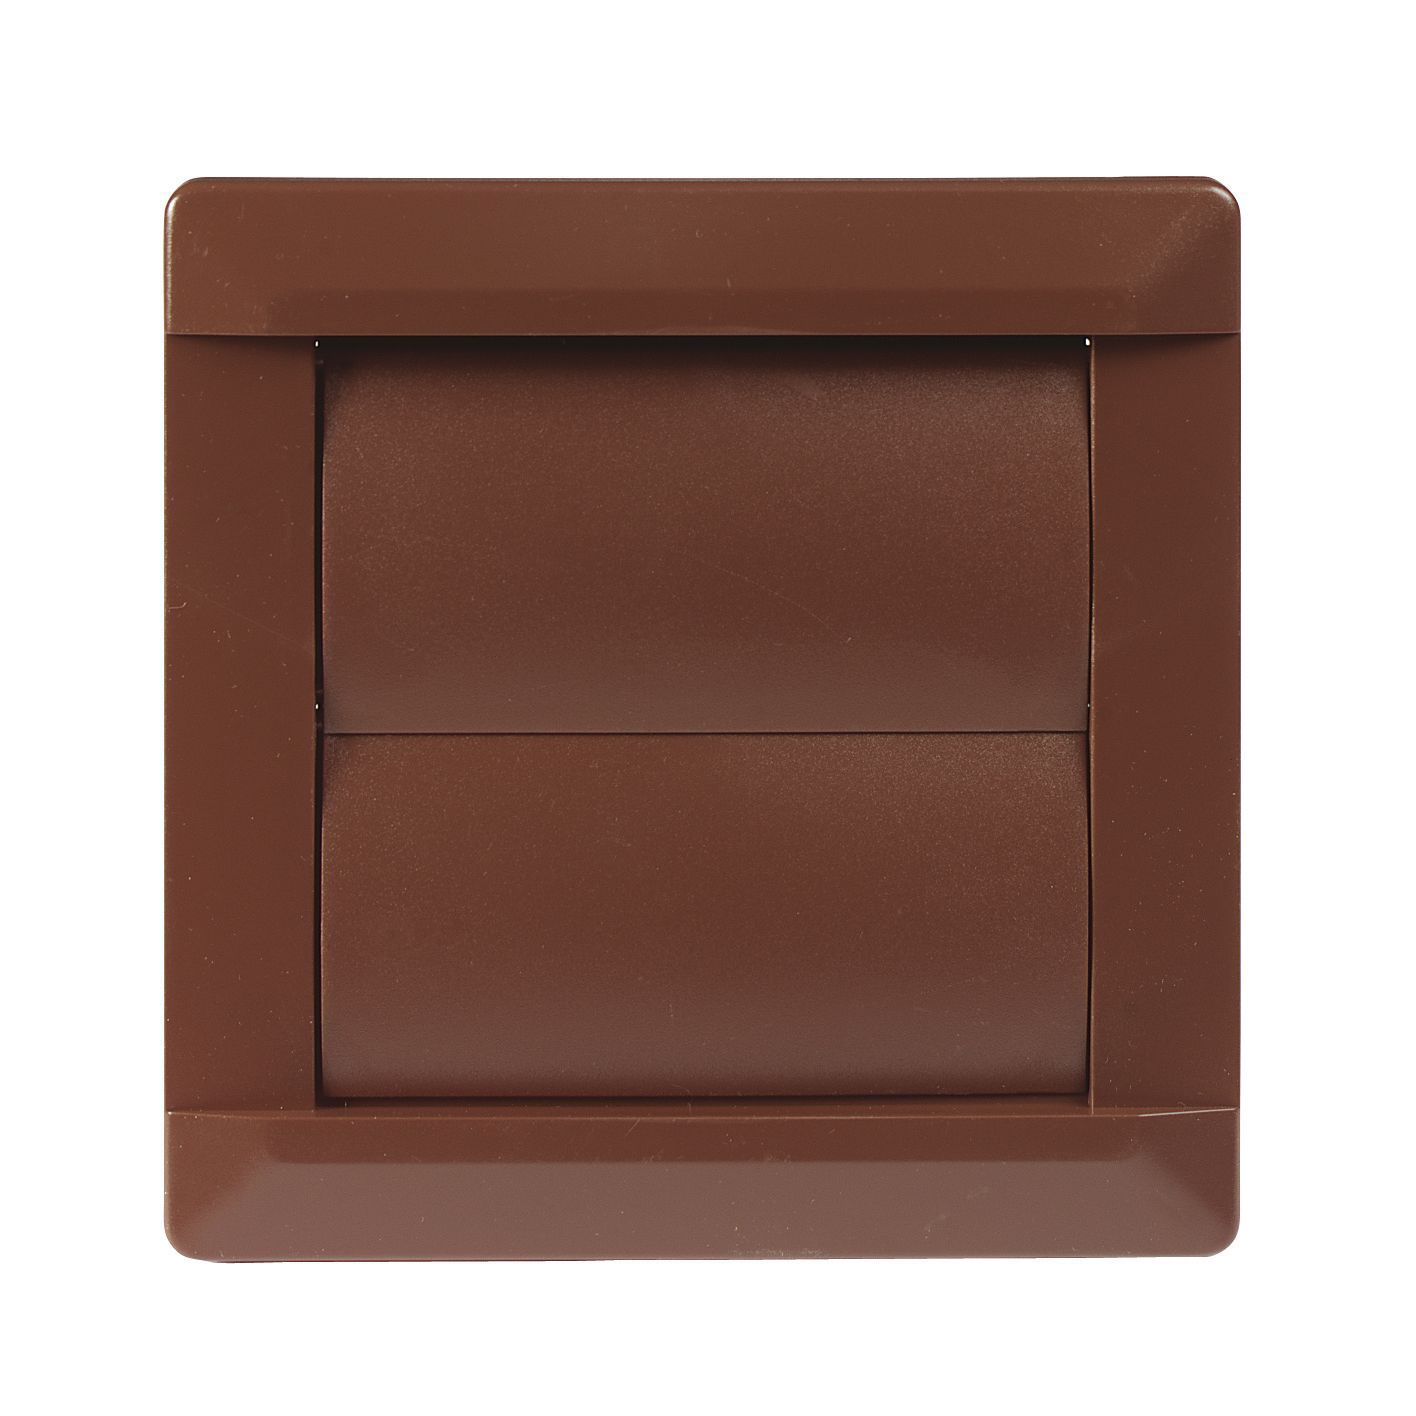 Manrose Brown Square Air Vent And Gravity Flap H110mm W110mm